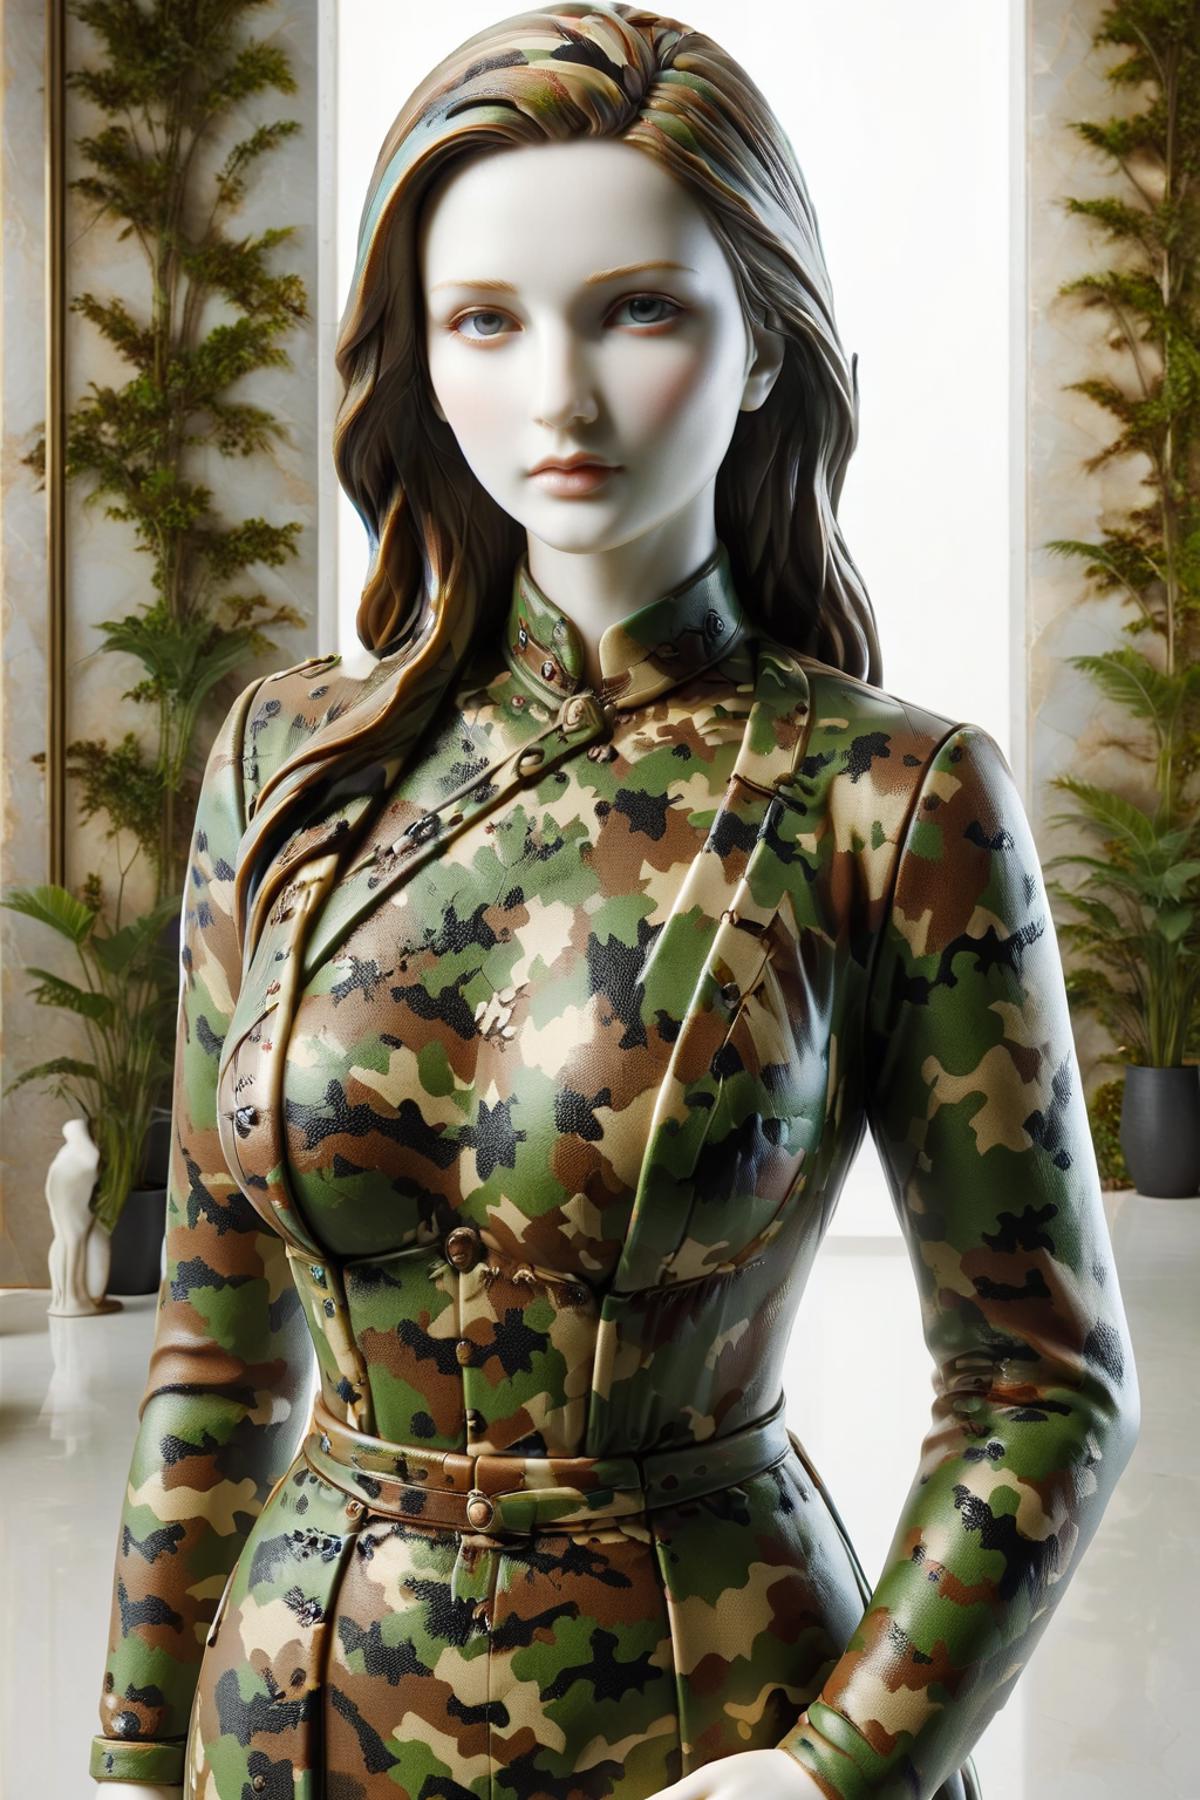 AI model image by CHINGEL